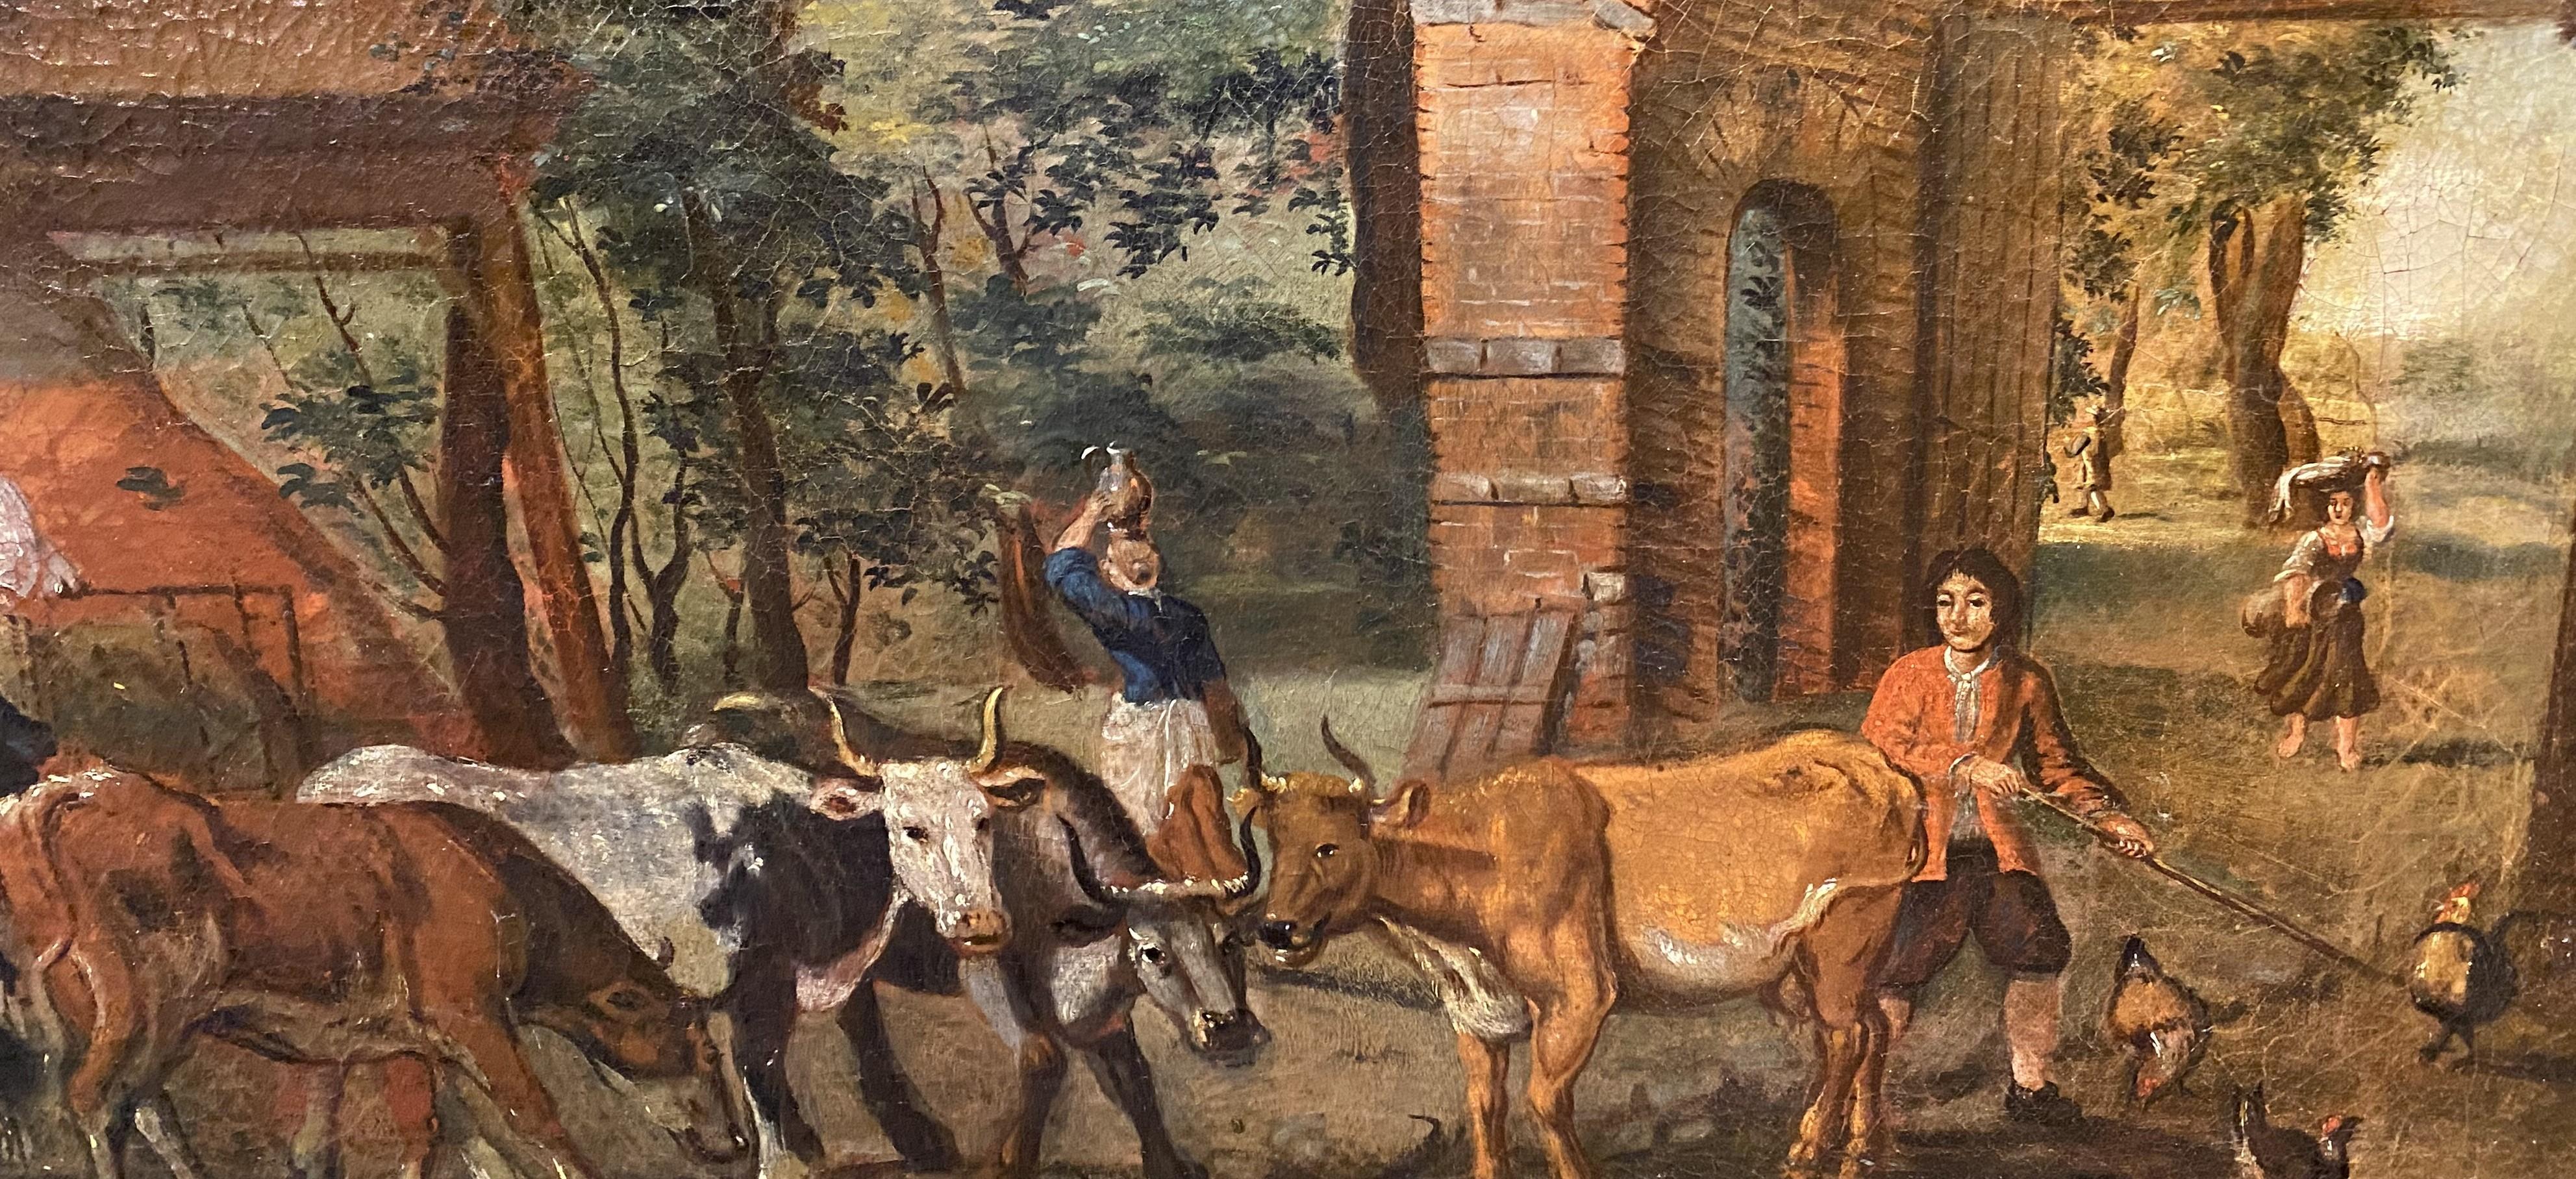 A fine 18th century Continental School landscape oil painting with animals including cows, horses, dogs, and chickens in a farm setting. Oil on canvas, laid down on board, unsigned, and housed in a molded giltwood frame with rust colored inset.